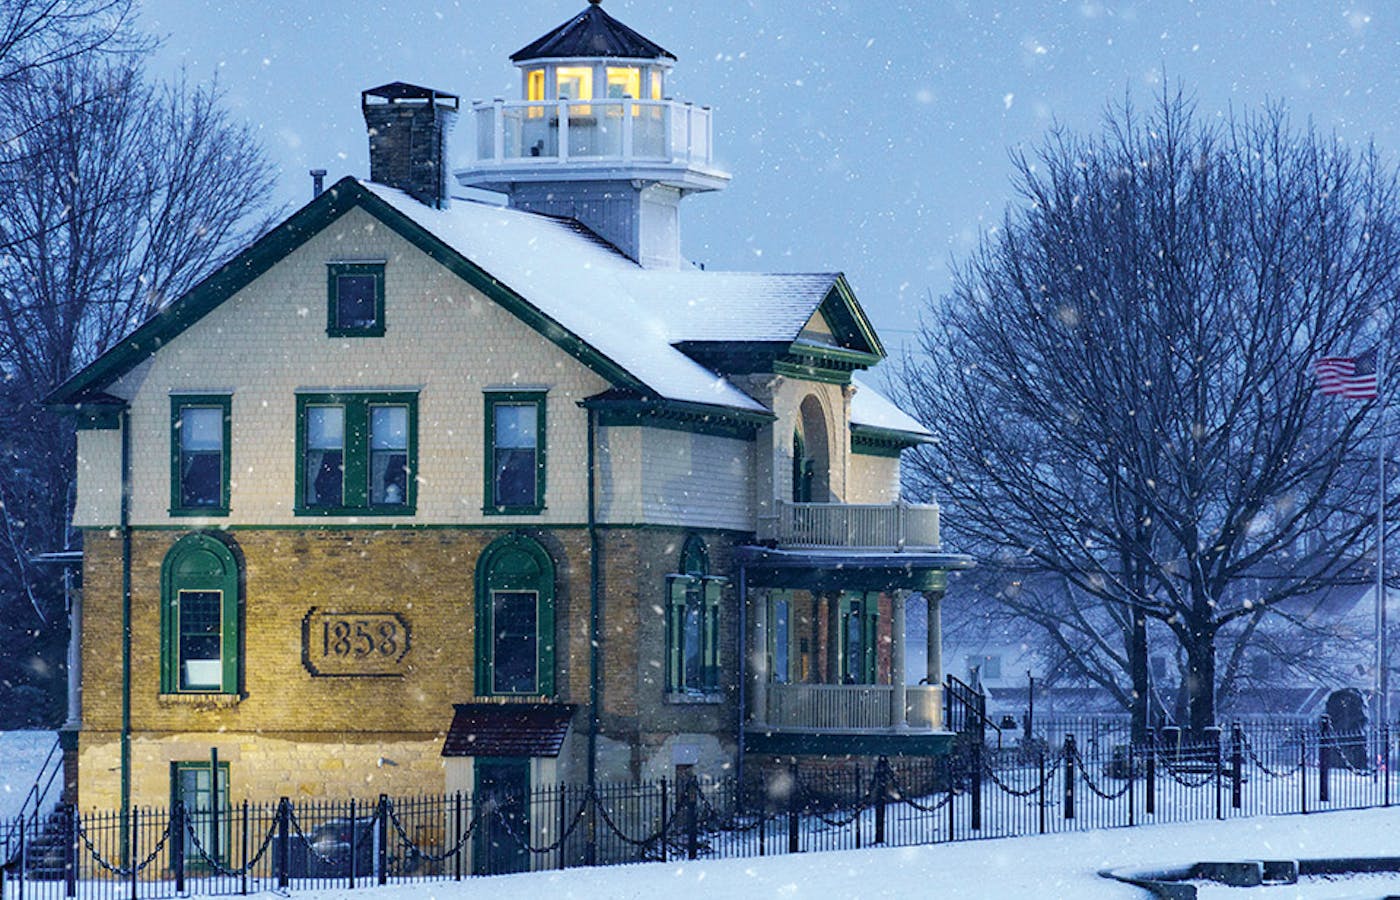 Exterior of Michigan City, Indiana’s Old Lighthouse Museum in the winter (photo by Josh McIntyre)